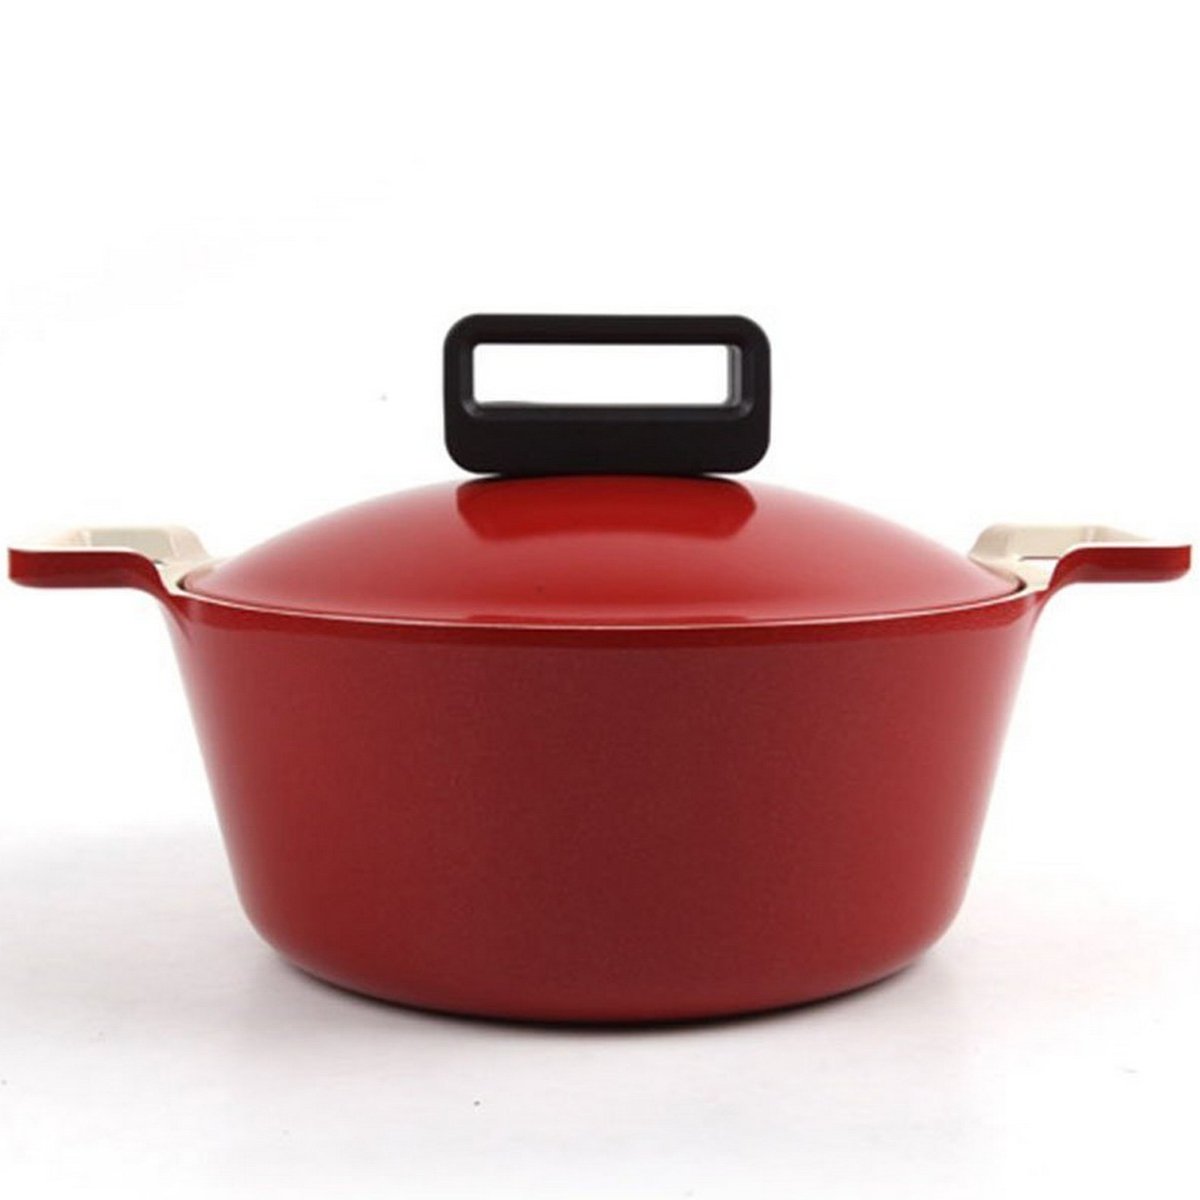 Neoflam Cube Die-Casted Casserole 24cm Assorted Colors